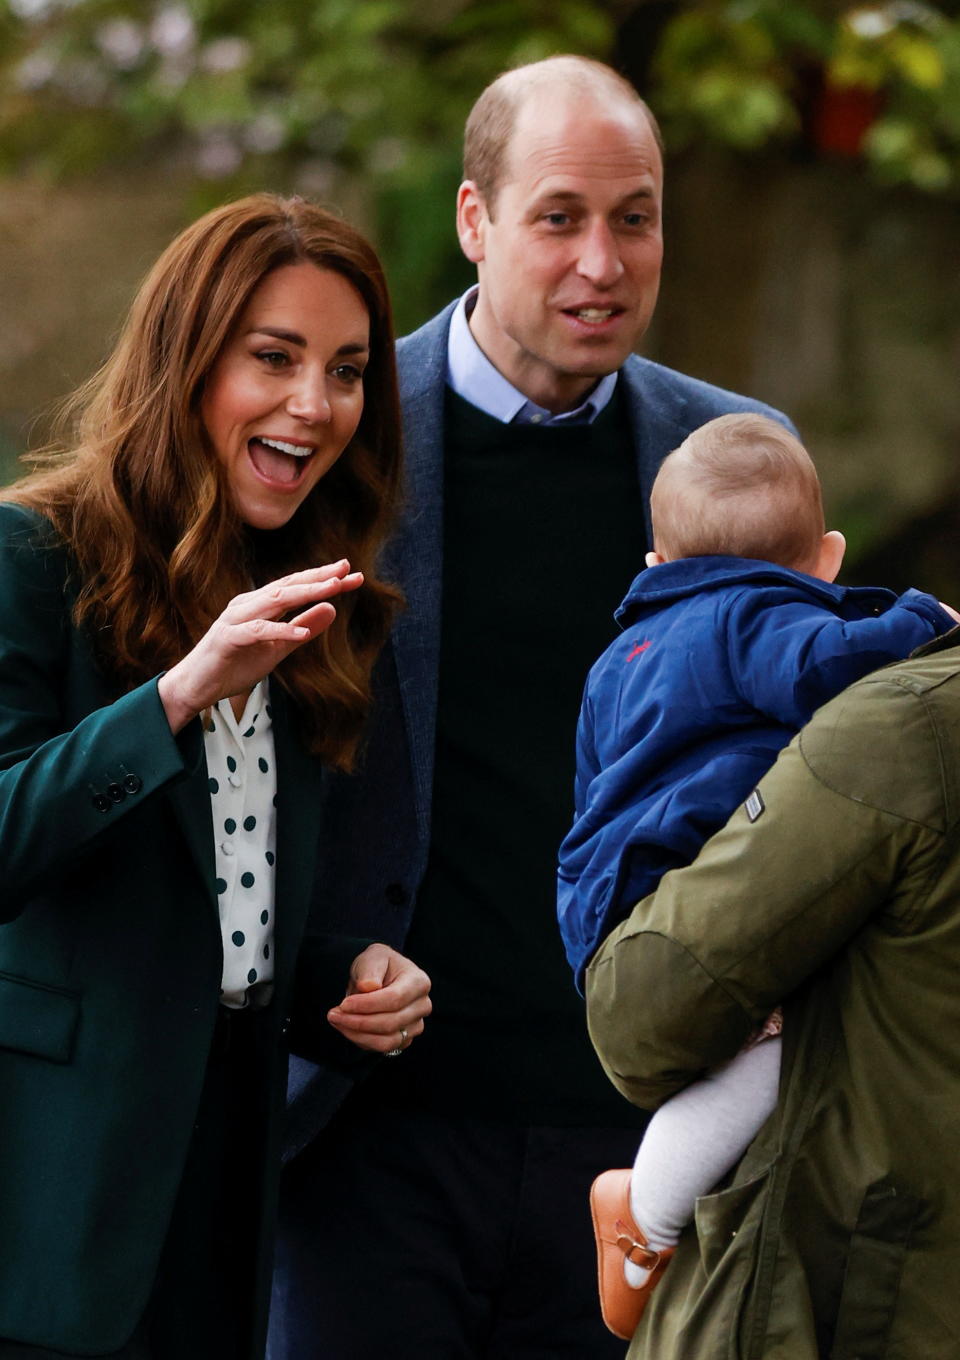 Britain's Prince William, Duke of Cambridge and Britain's Catherine, Duchess of Cambridge meet Penelope Stewart during their visit to Starbank Park to hear about the work of Fields in Trust, along with Britain's Prince William, Duke of Cambridge, in Edinburgh, Scotland on May 27, 2021. (Photo by PHIL NOBLE / POOL / AFP) (Photo by PHIL NOBLE/POOL/AFP via Getty Images)